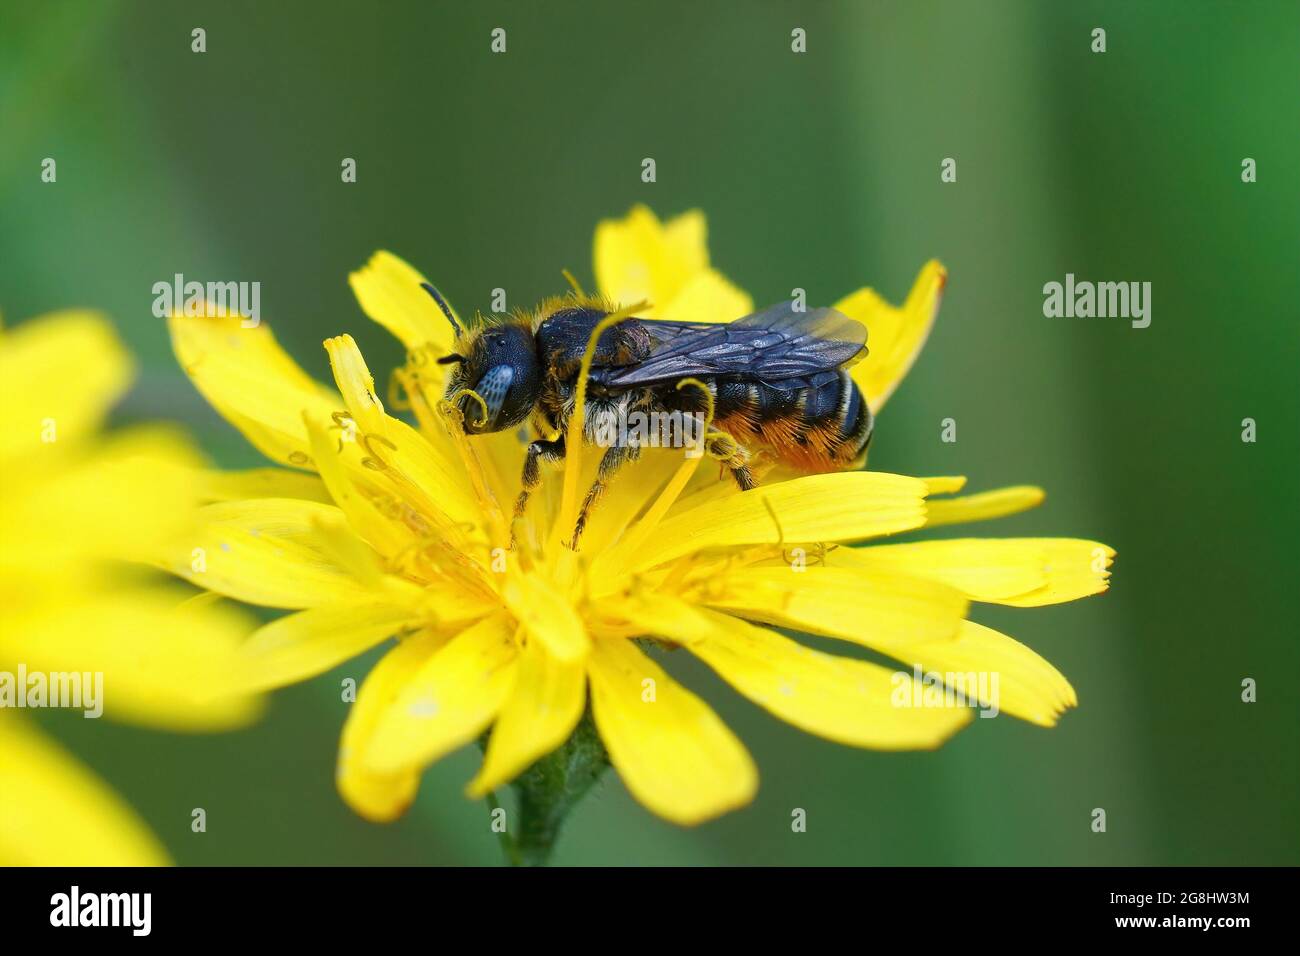 Closeup of the Spined mason bee pollinating on the yellow flatweed flower Stock Photo